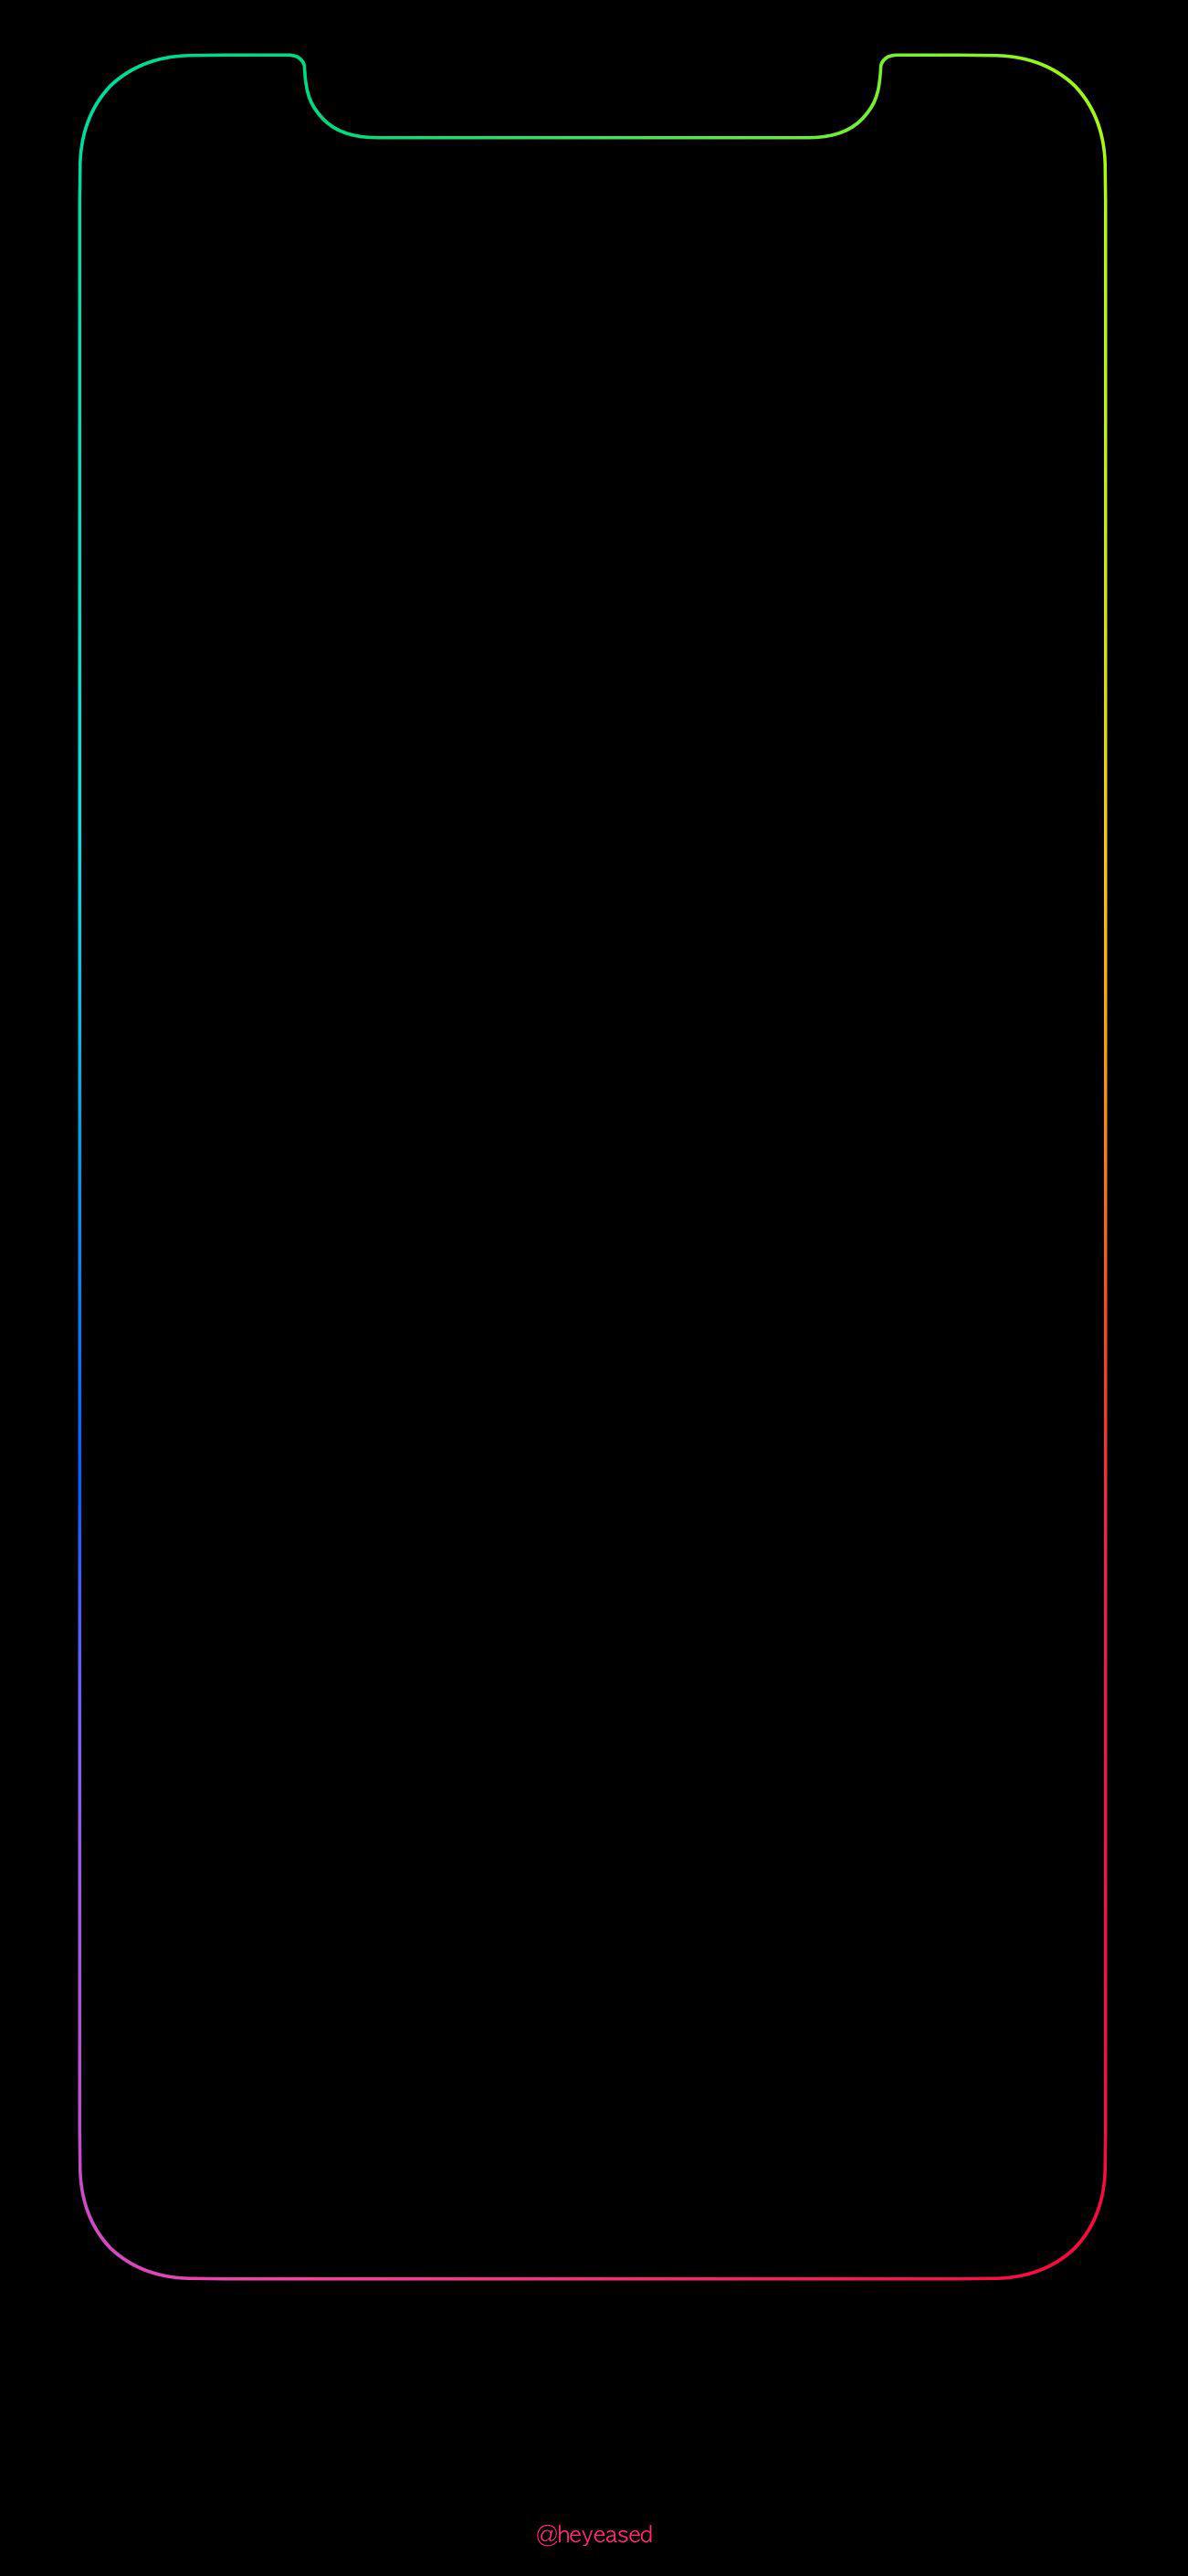 Can anyone make this wallpaper for the iPhone 12 pro max??